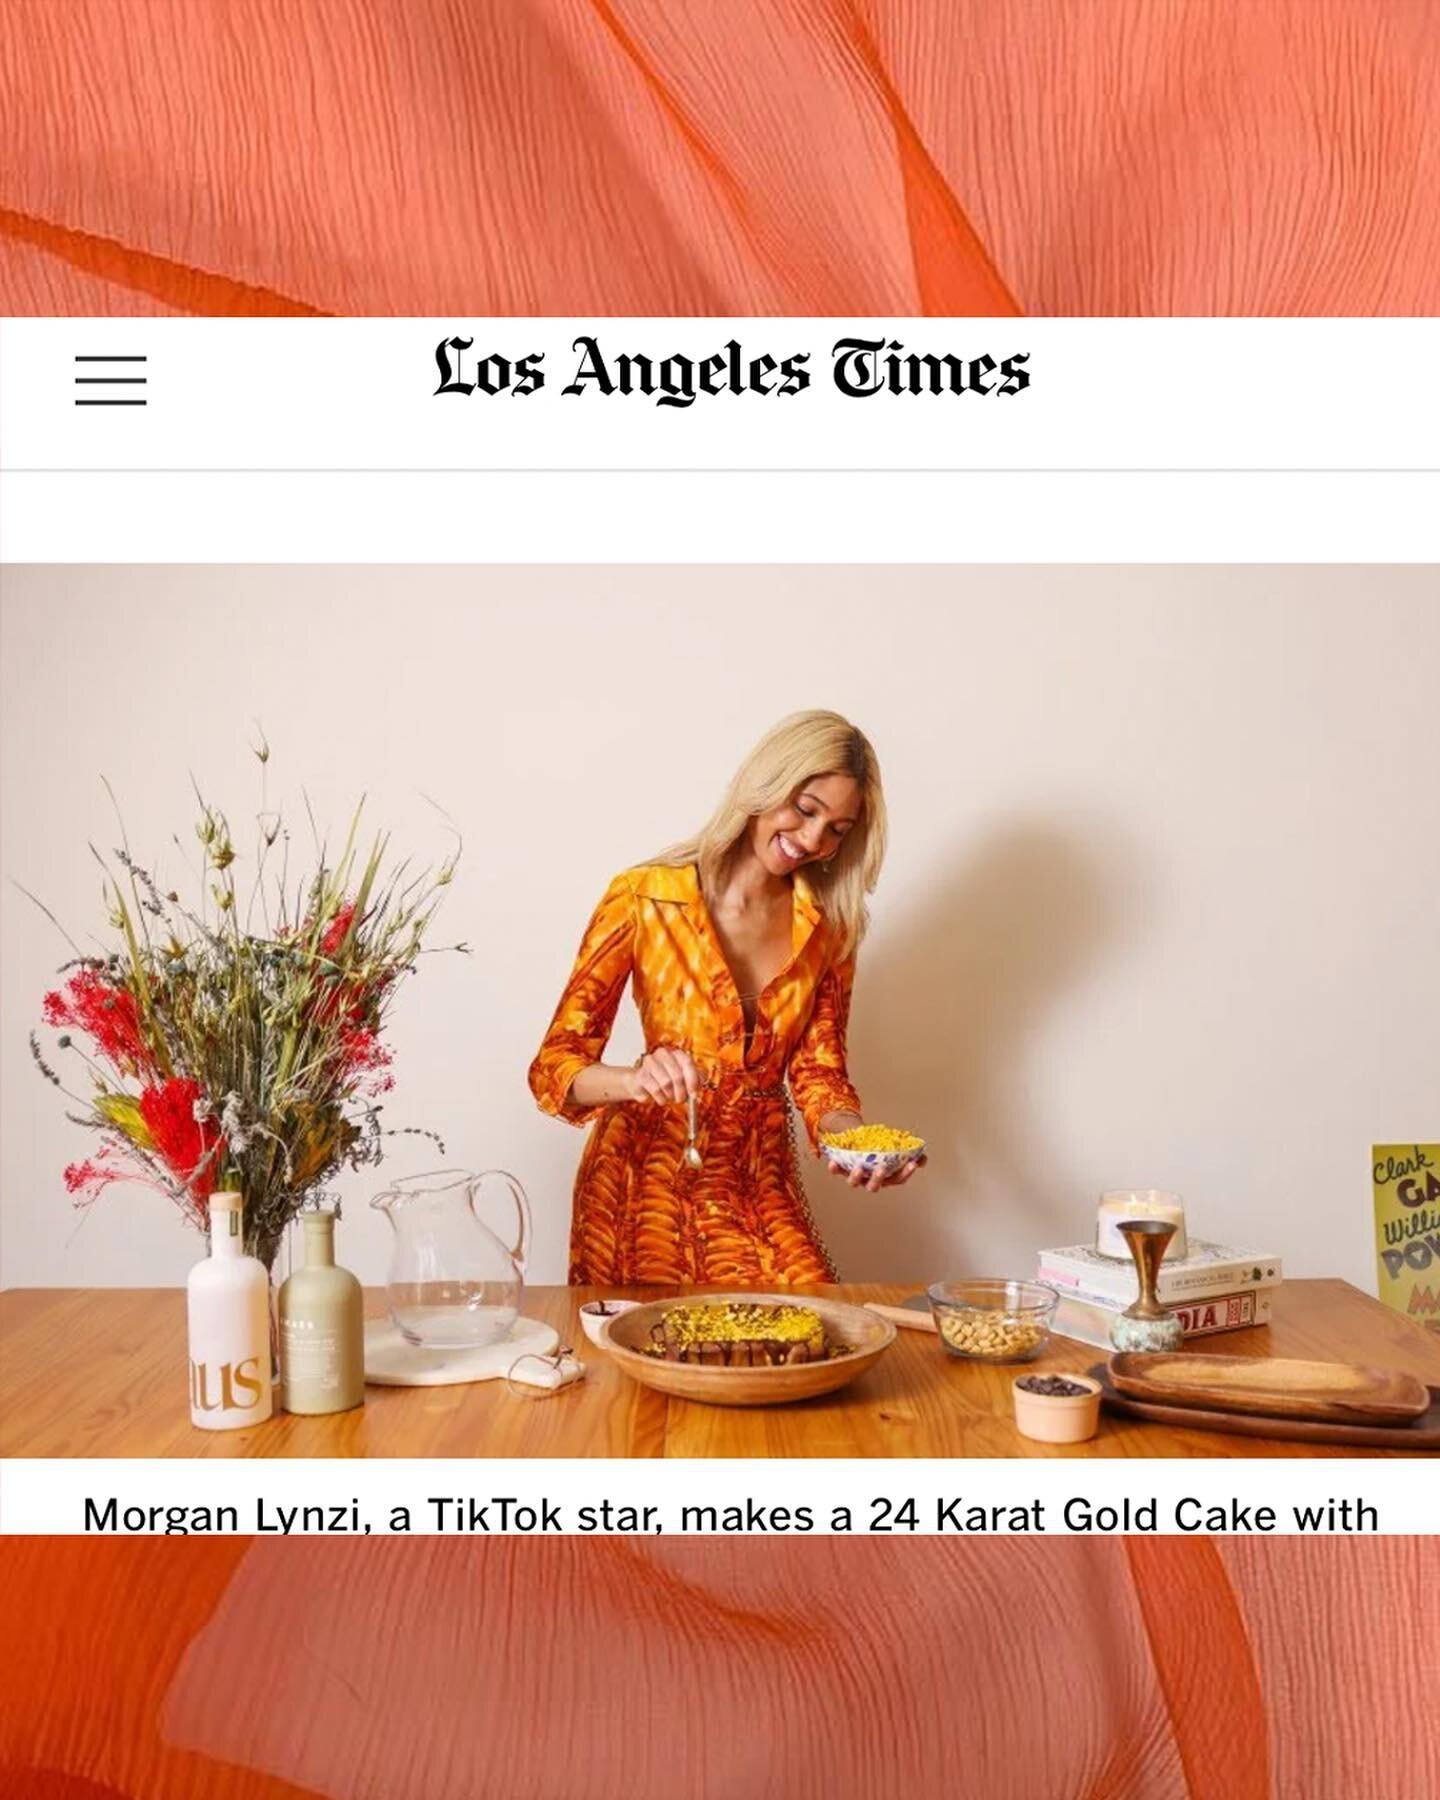 LA born &amp; raised, so beautiful to be featured by my city 💛 thank you @latimes - article powered by women @caglecooks @dania_maxwell. Thank you to all the new followers and fam joining in everyday, you all are helping to create a new culture and 